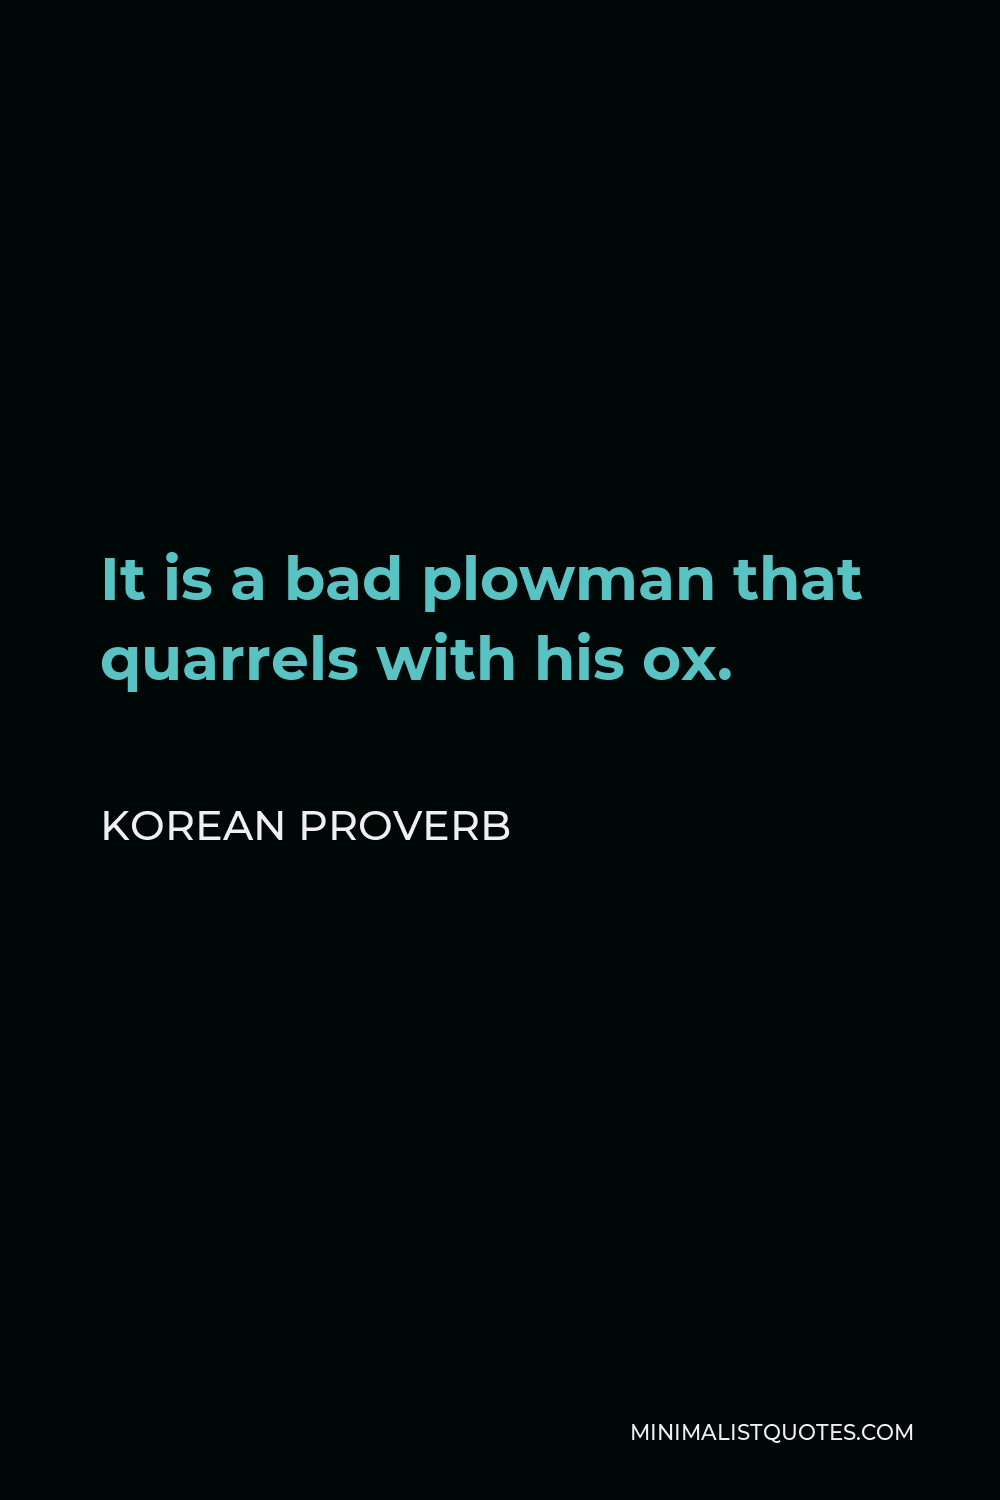 Korean Proverb Quote - It is a bad plowman that quarrels with his ox.